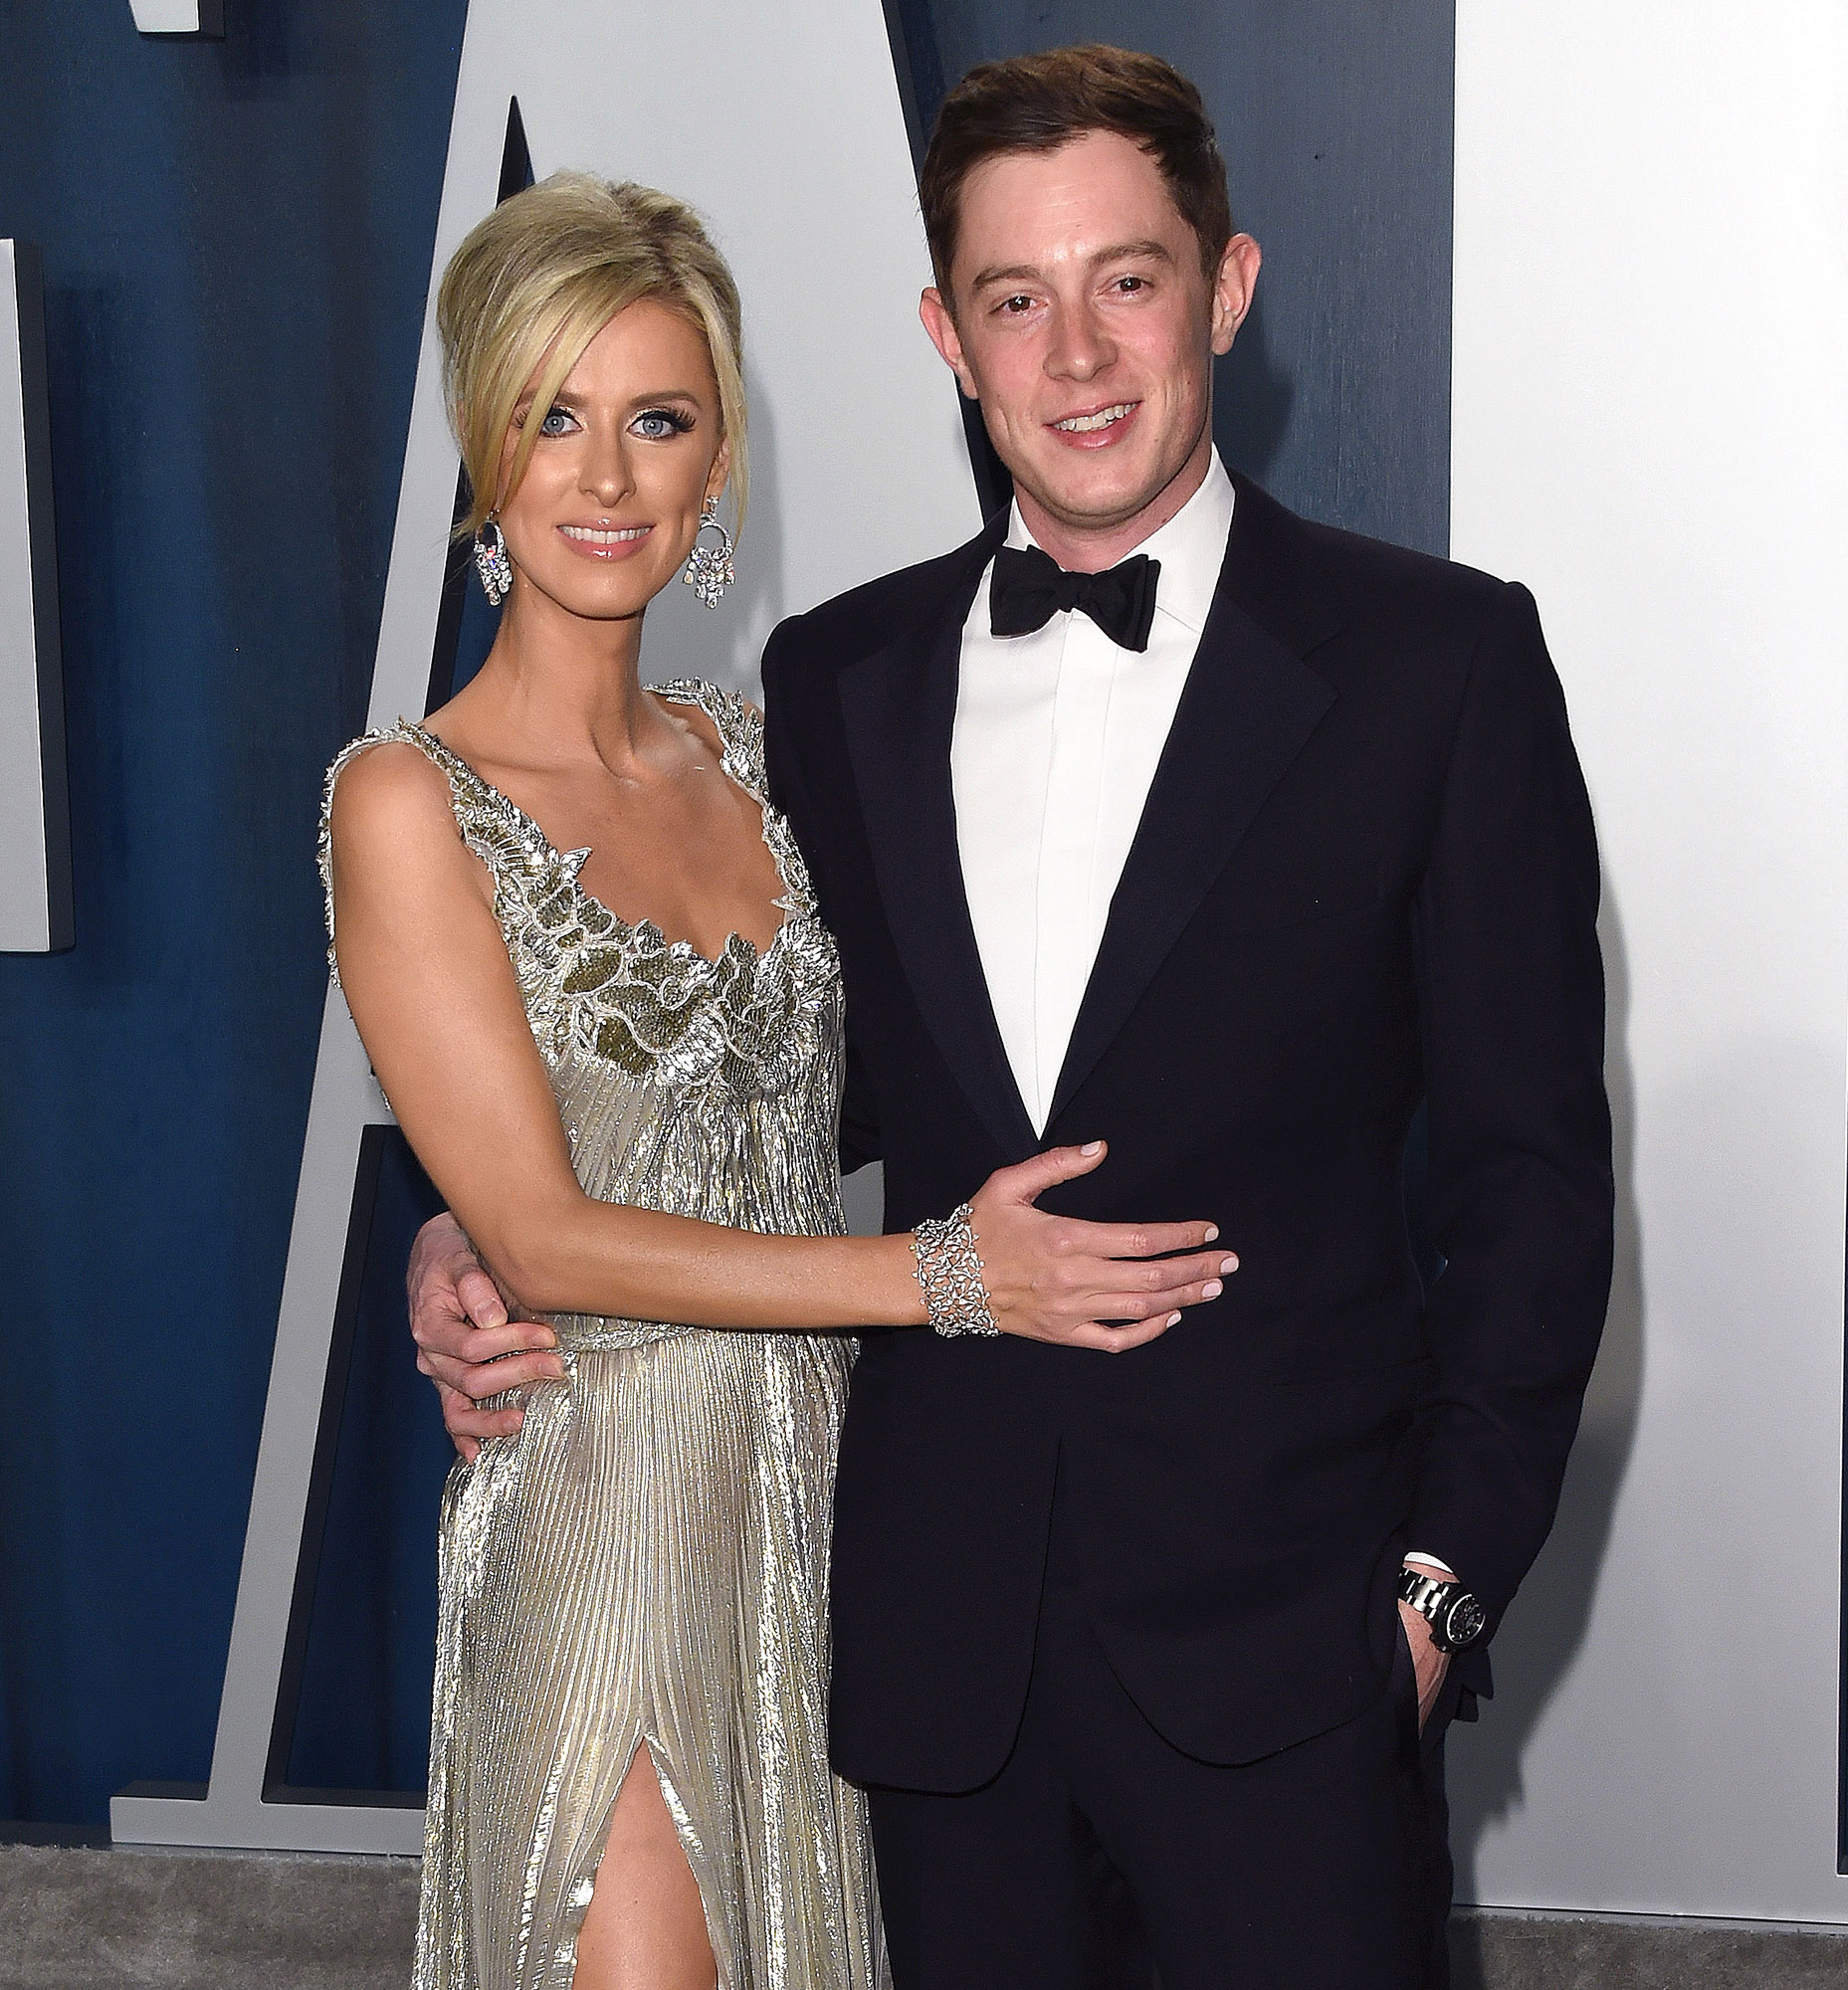 Nicky Hilton Is Pregnant, Expecting 3rd Baby With James Rothschild